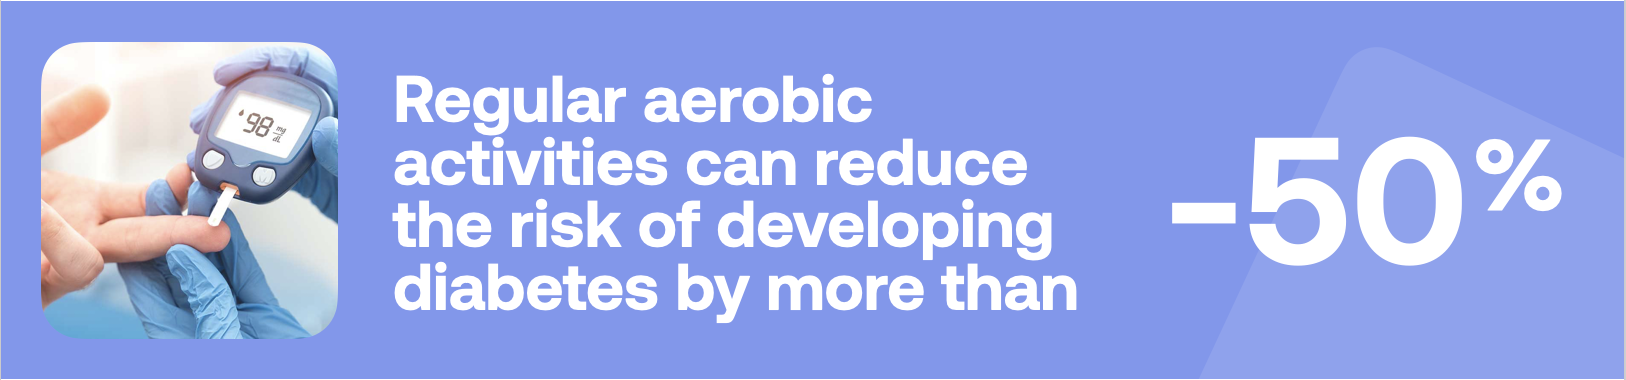 Regular aerobic activities can reduce the risk of developing diabetes by more than -50%